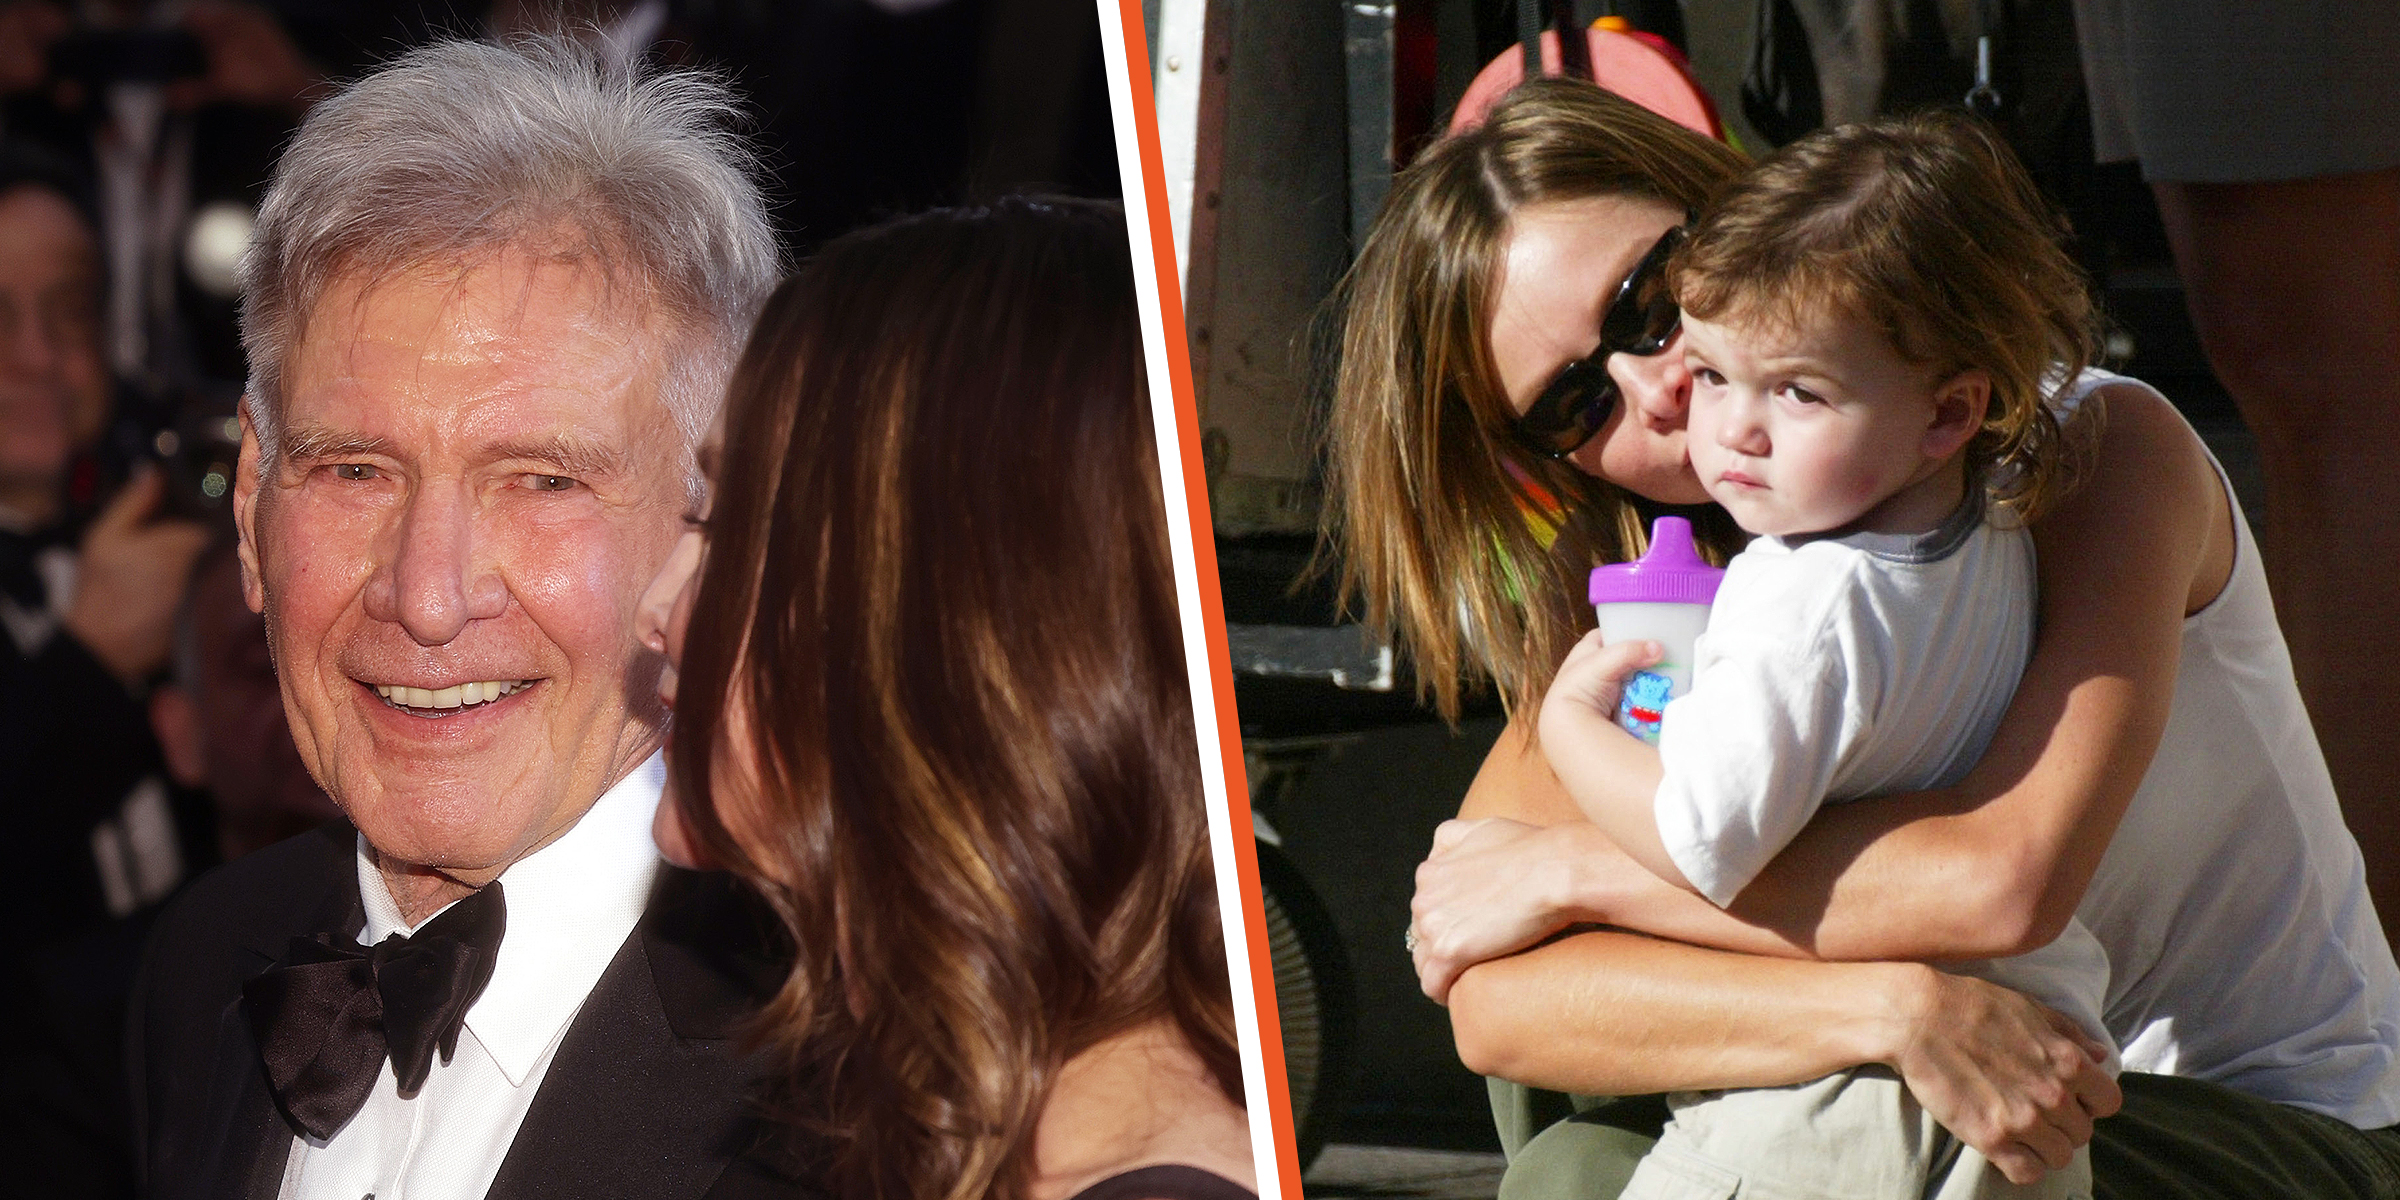 Harrison Ford and Calista Flockhart | Calista Flockhart and son Liam | Source: Getty Images